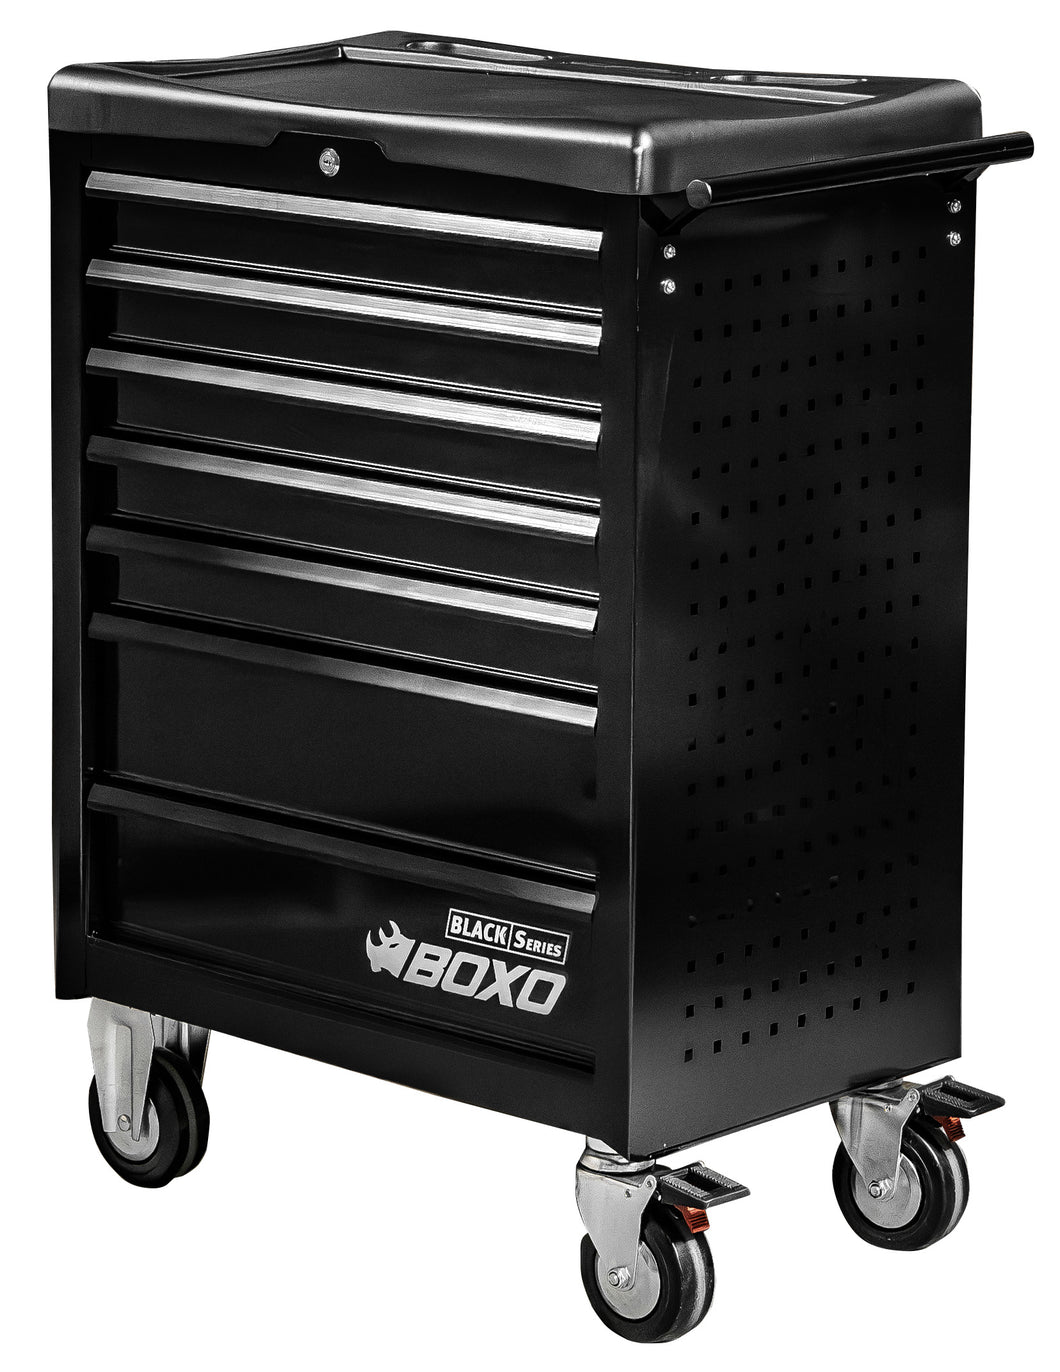 BOXO Black Series 27" 7 Drawer Toolbox Roll Cab & Composite Top | Boxo UK